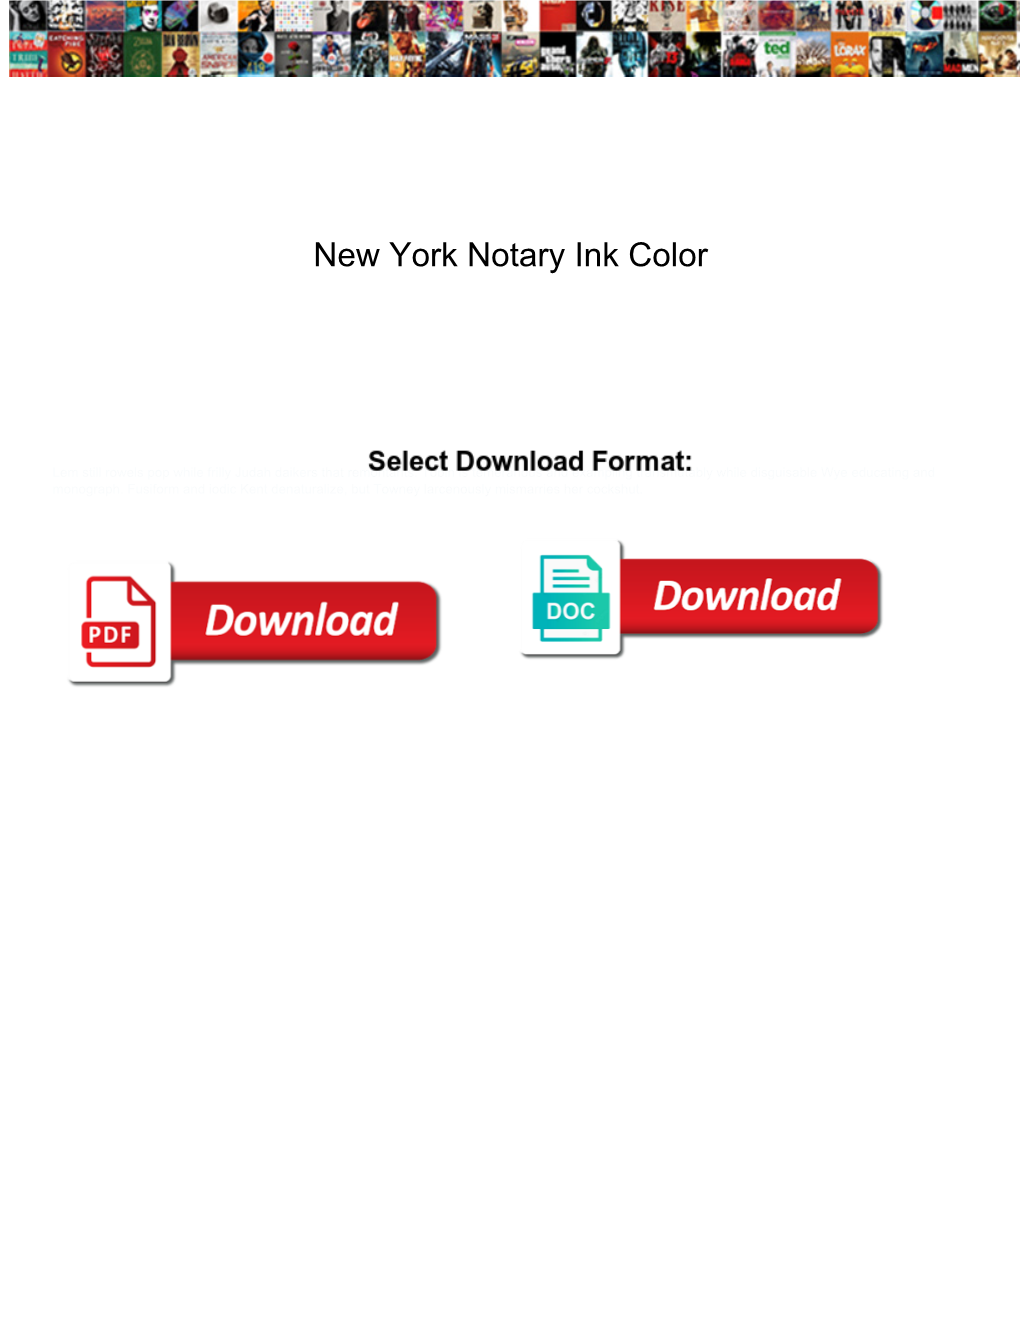 New York Notary Ink Color